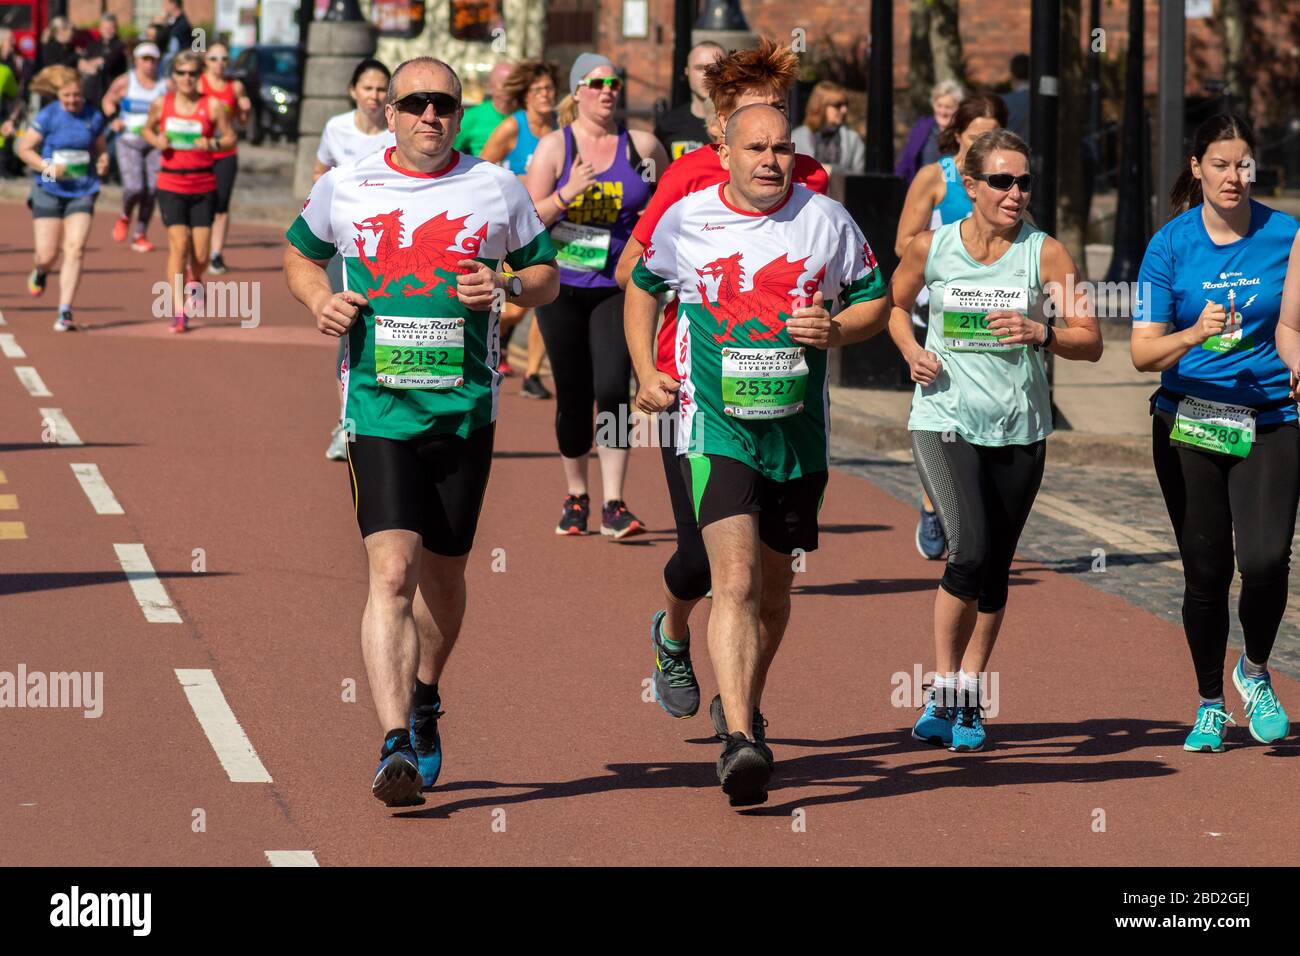 Runners wearing Wales shirts, Rock 'n' Roll 5K, Salthouse Quay, Liverpool Stock Photo